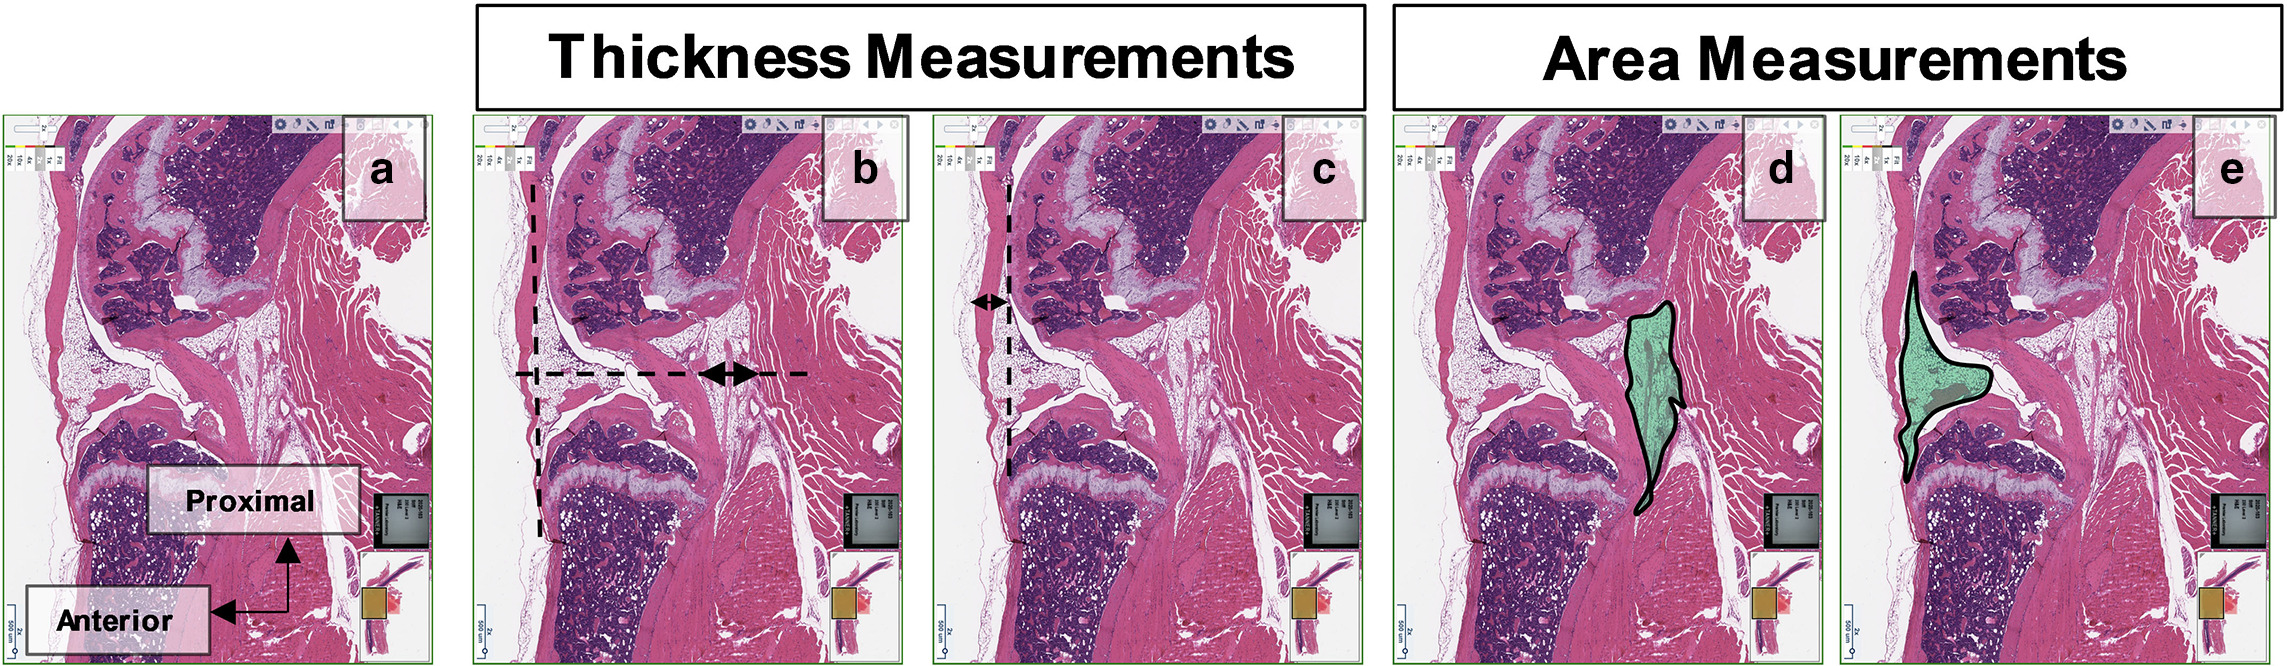 Fig. 4 
            Histological assessment of novel arthrofibrosis mouse model. The pictures shown summarize histological methods and measurements that were used to assess knee joints in the present study. a) A central section of a control mouse knee after haematoxylin and eosin staining. b) Measurement of the posterior capsule thickness using a line perpendicular to the patellar tendon axis. c) Measurement of the patellar tendon thickness at mid-distance between the apex of the patella and the anterior tibial tuberosity. d) The area of the posterior capsule was measured by manual contouring. e) The area of the Hoffa fat pad was measured by manual contouring.
          